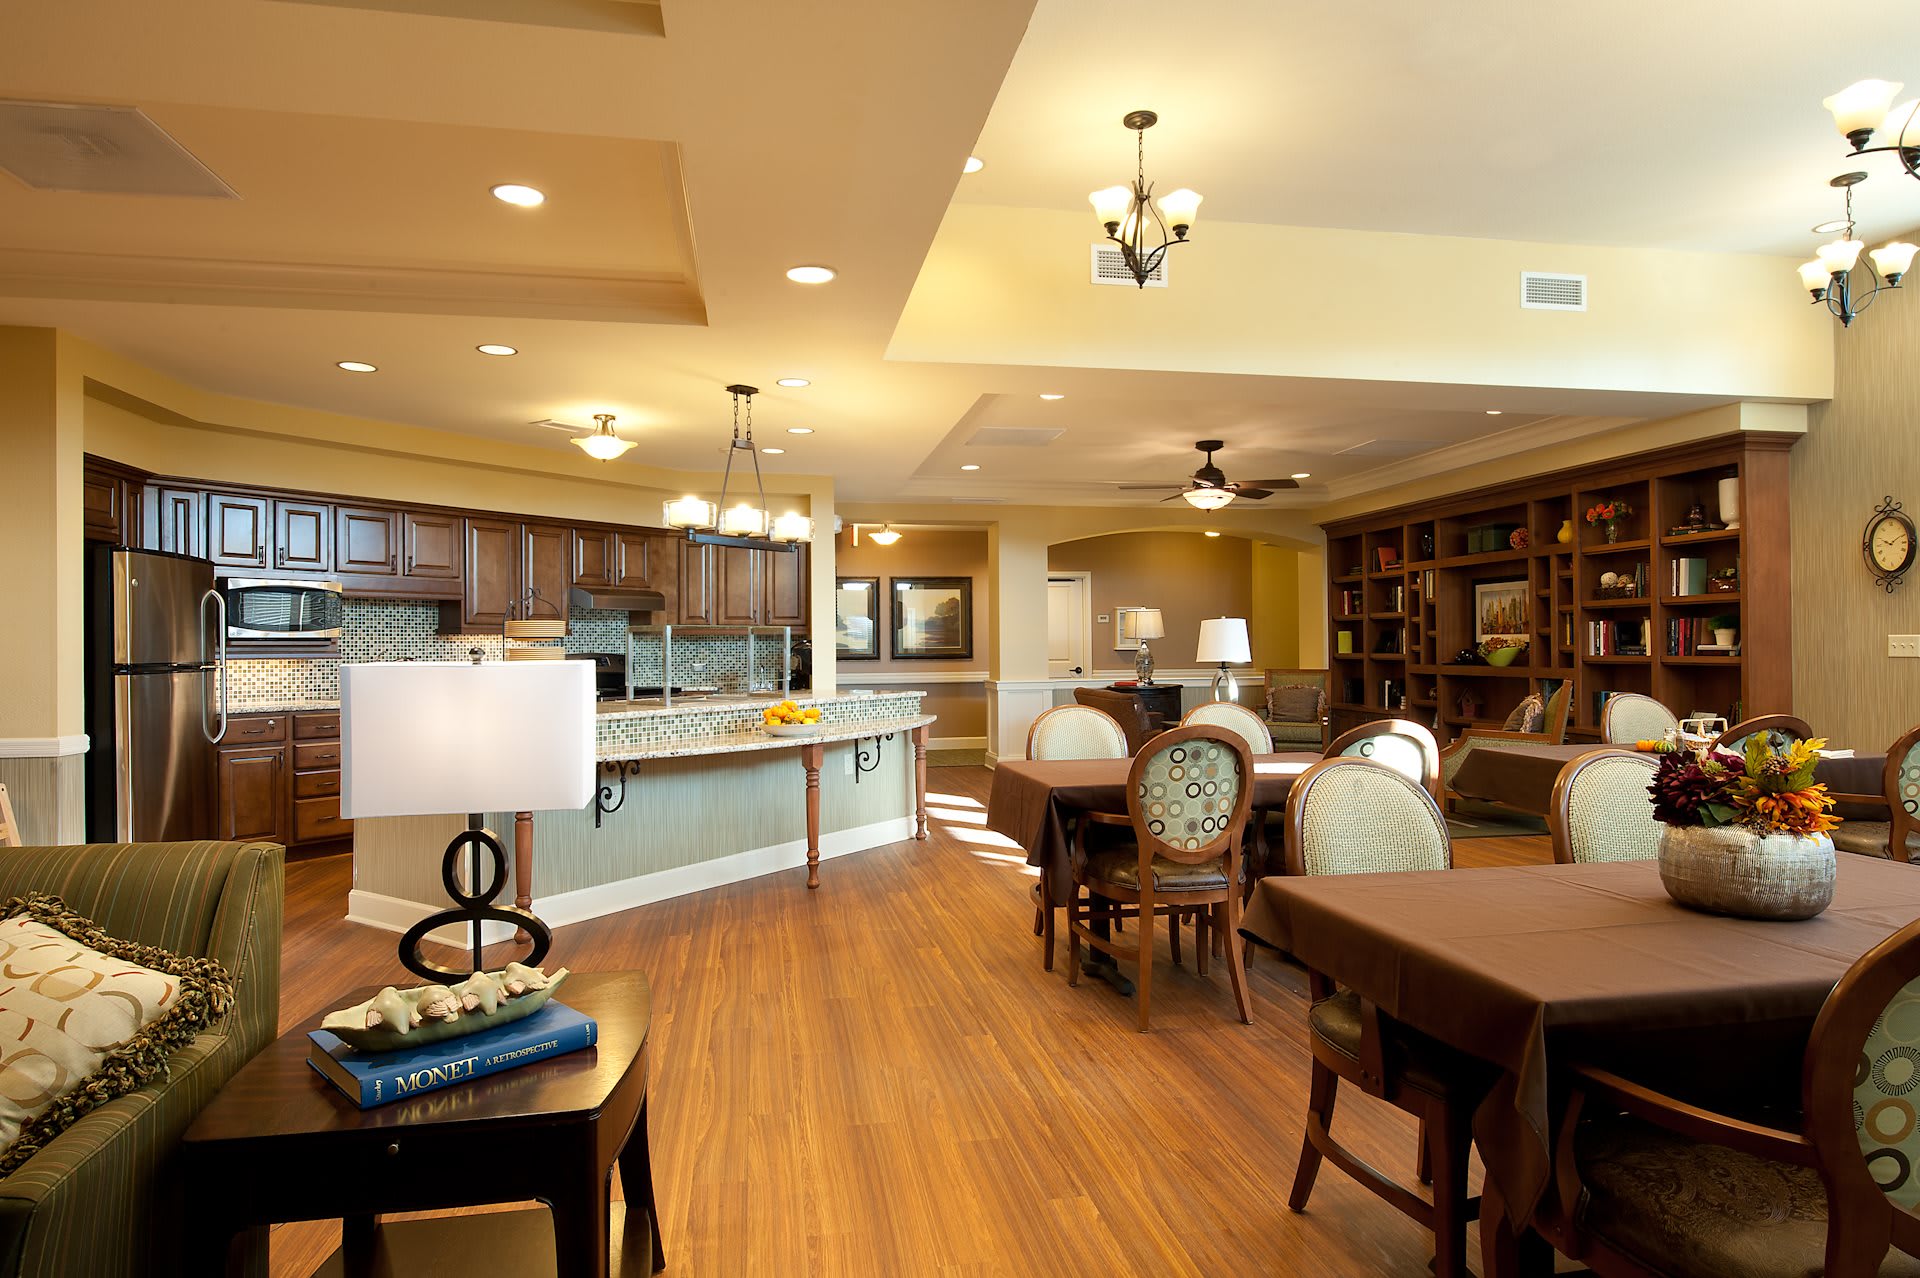 The Heritage of Overland Park communal kitchen